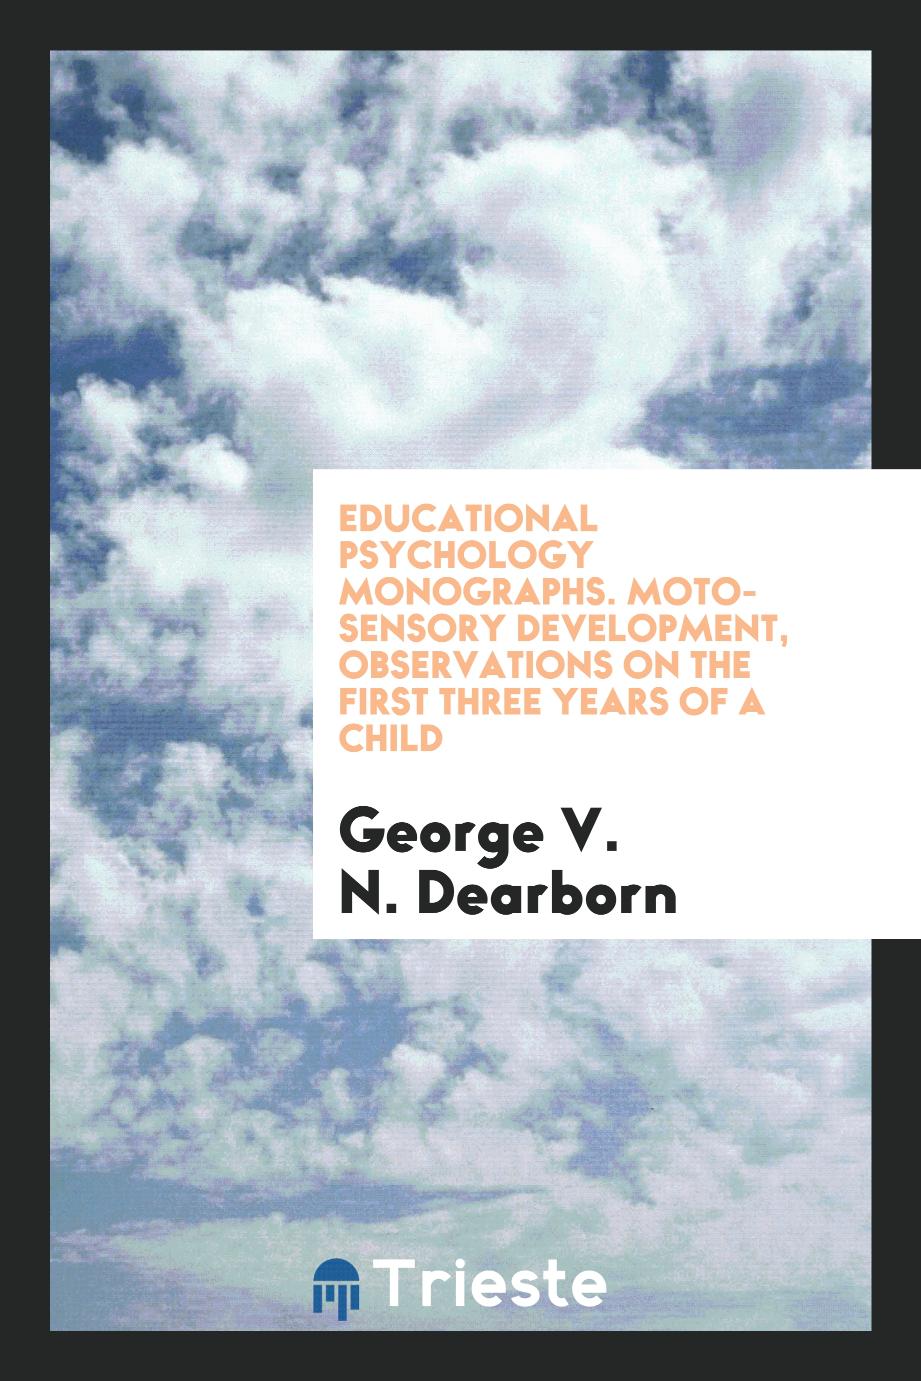 Educational Psychology monographs. Moto-sensory development, observations on the first three years of a child